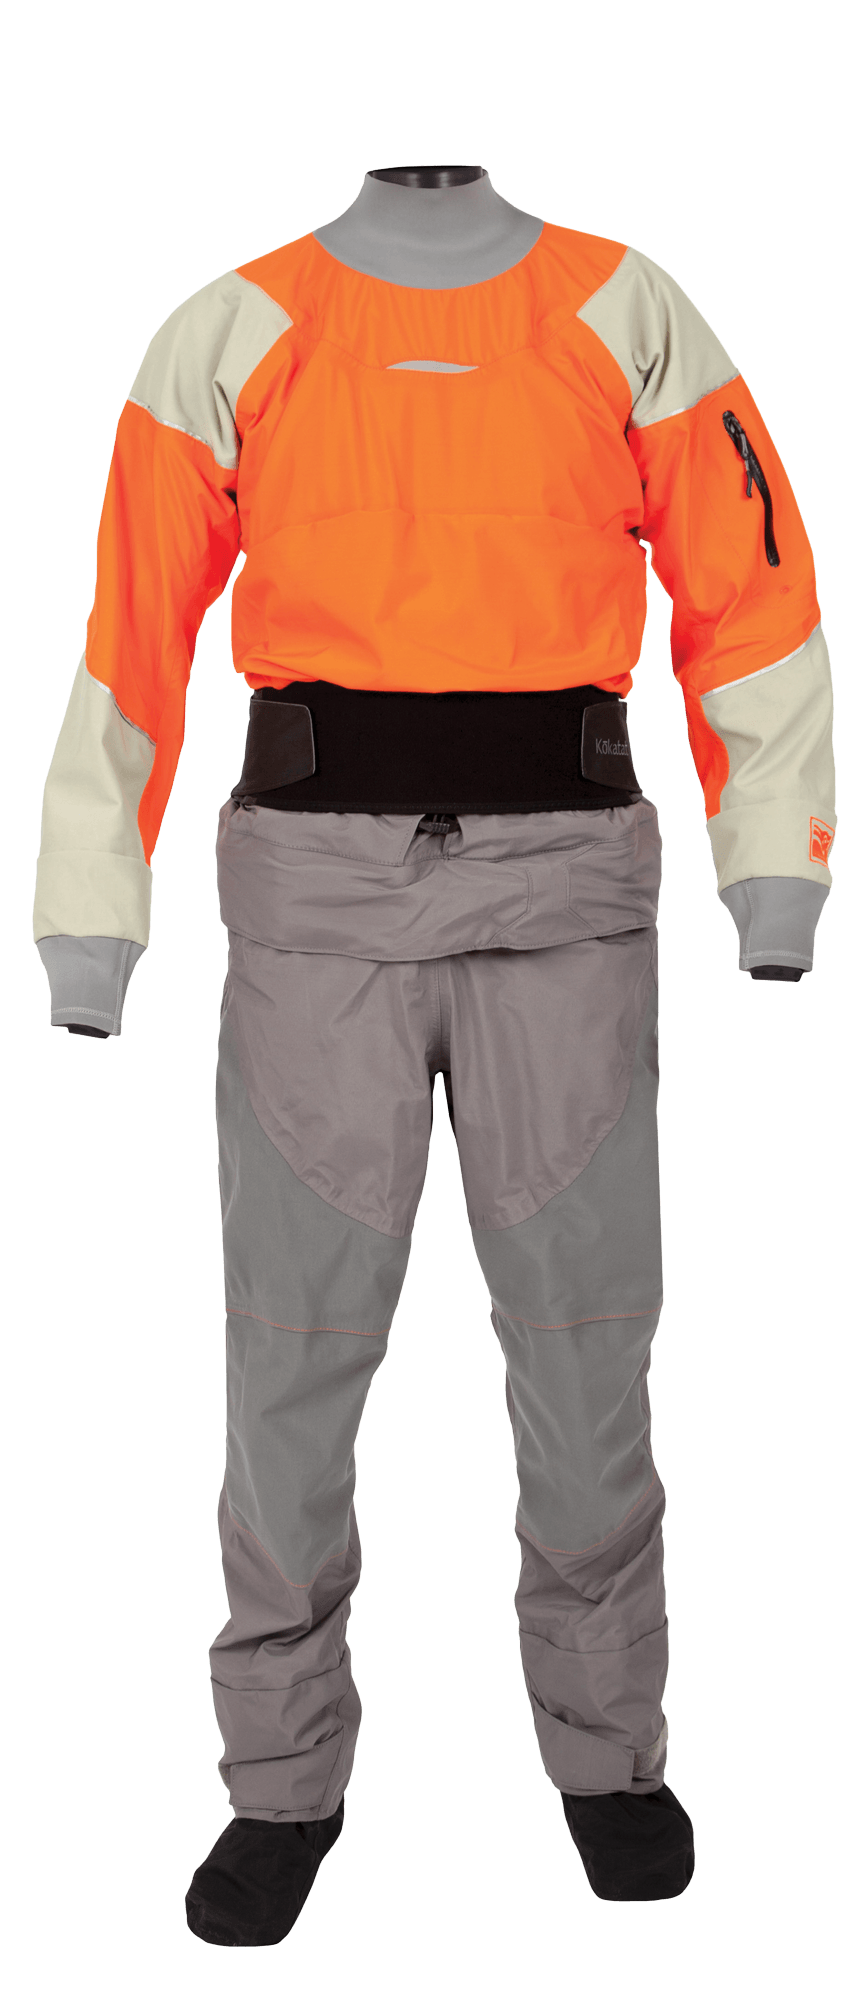 Semi-Dry Suits and Dry Suits - BayCreek PAddling Center